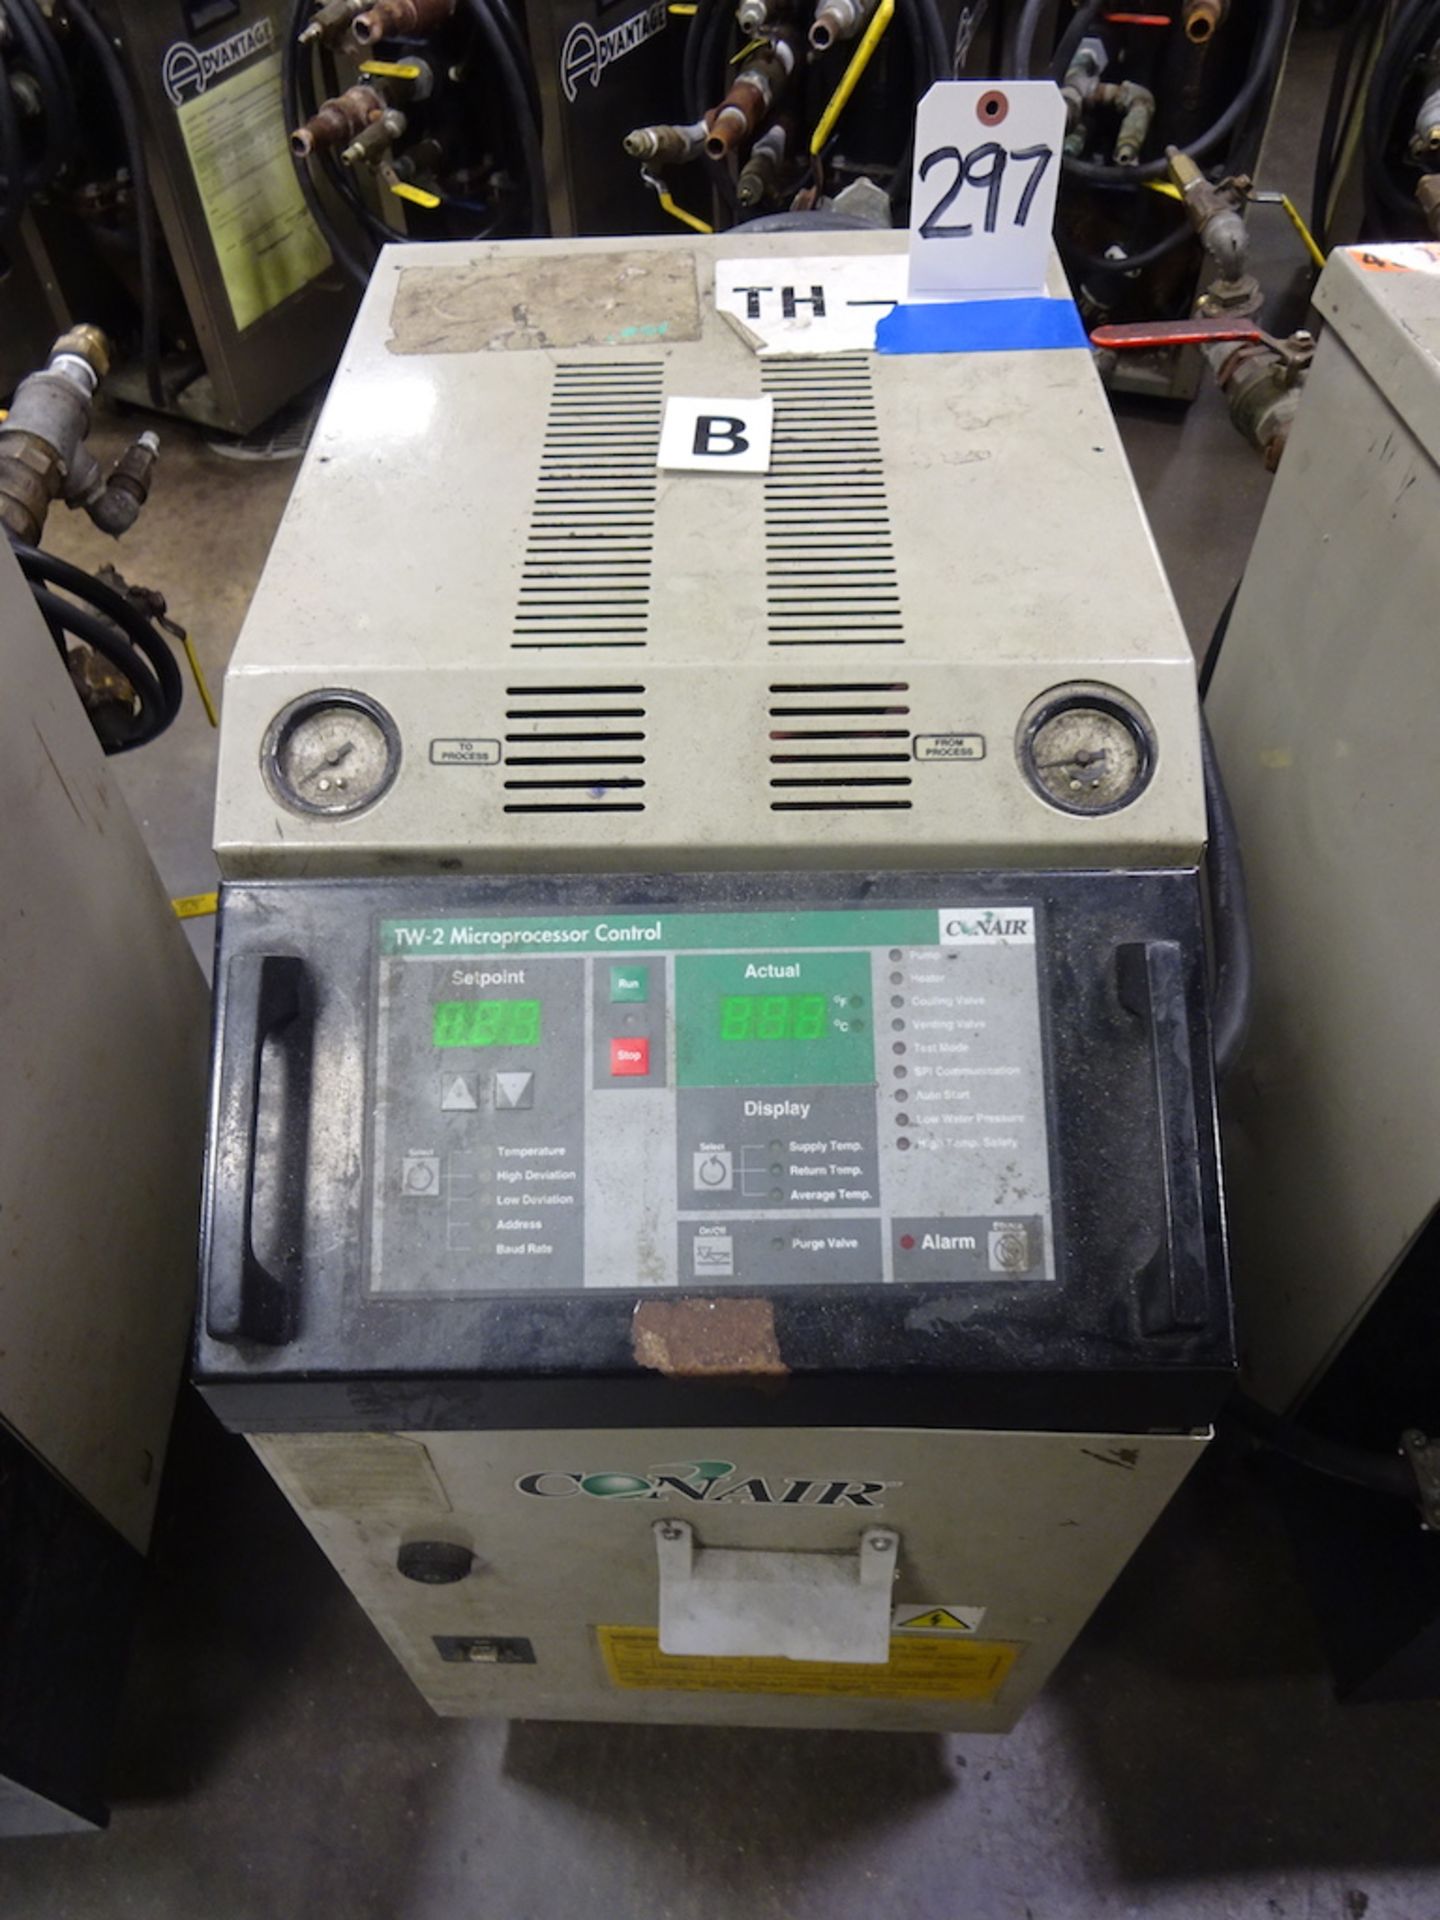 Conair Model MXP1-D1 Thermolator Temperature Controller, S/N 66593, with TW-2 Microprocessor